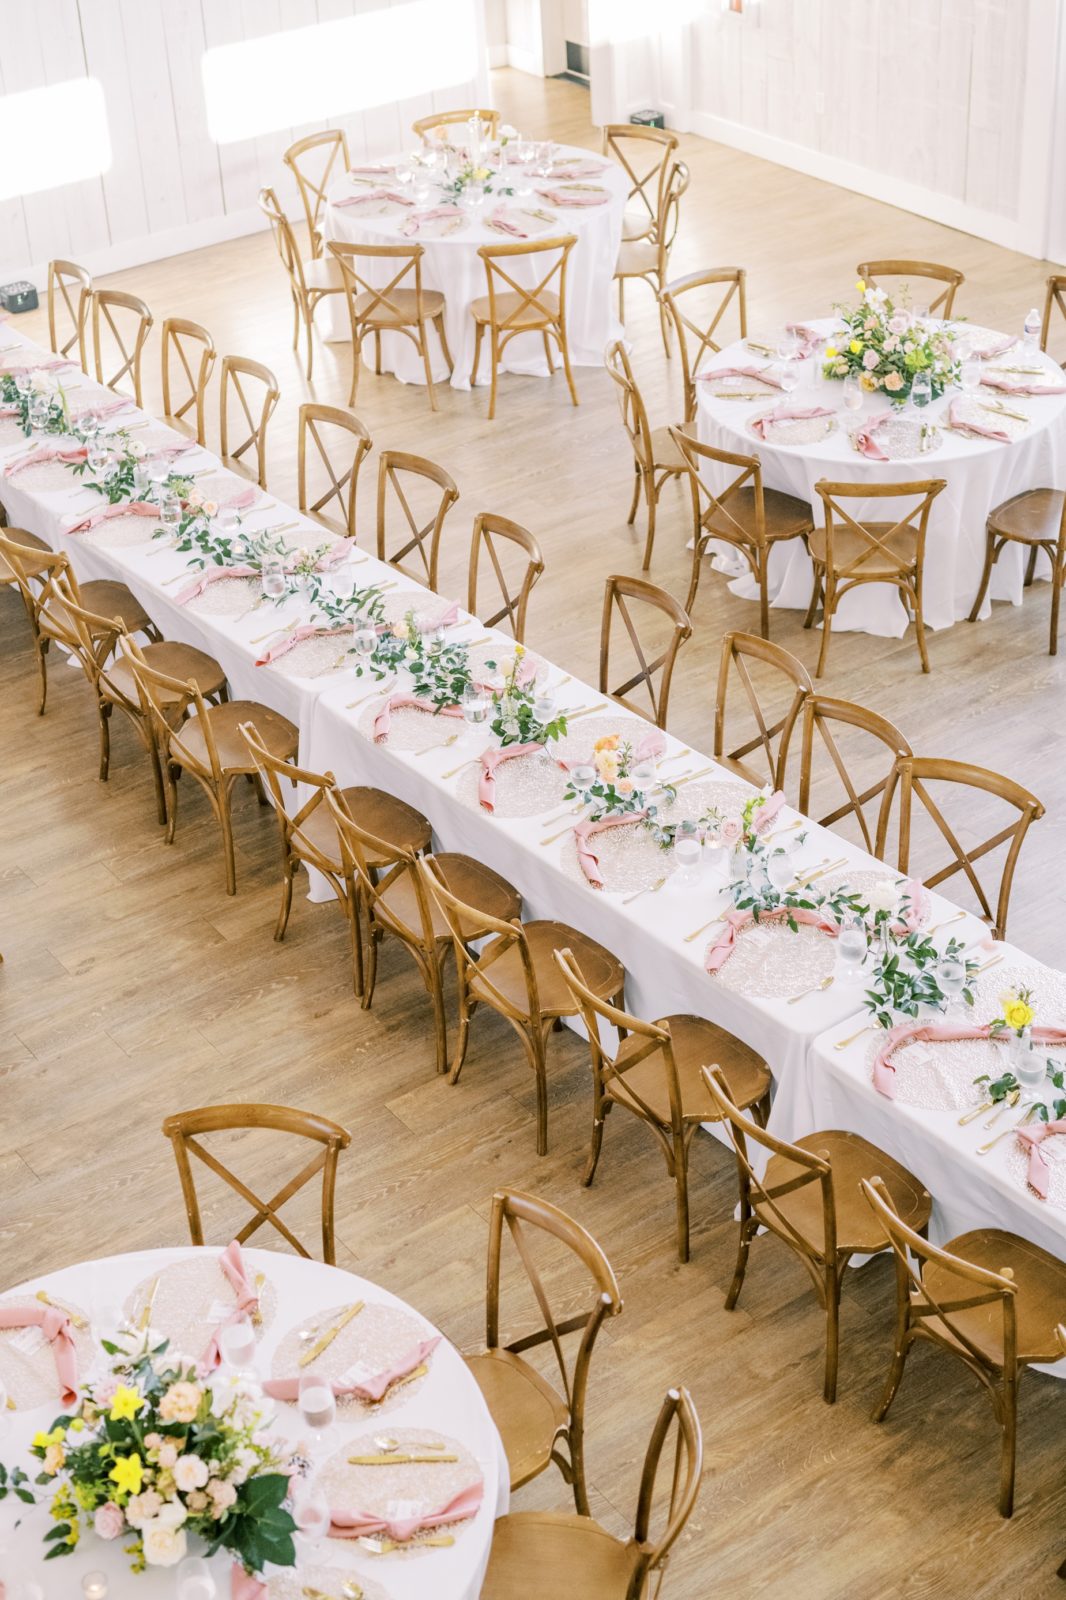 Spring luncheon set up with fresh florals, glass plates, and pink napkins by Christina Elliott Photography. spring wedding #ChristinaElliottPhotography #ChristinaElliottWeddings #Houstonwedding #TheSpringsVenue #EastHoustonweddings #Mrs #Mr